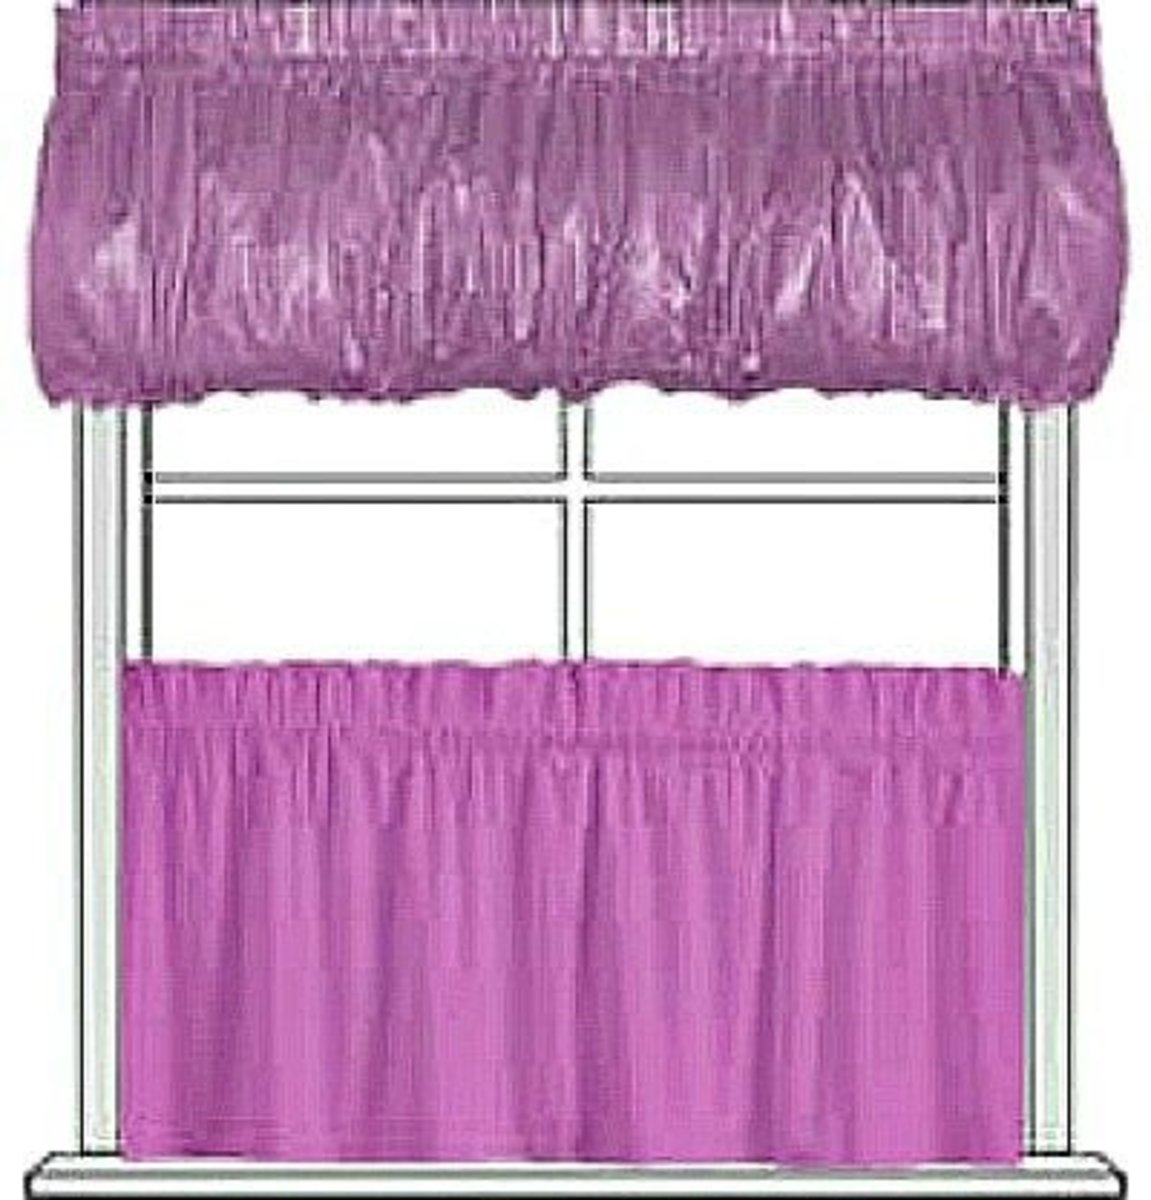 Balloon valances offer an interesting shape and texture—and they're surprisingly easy to craft.